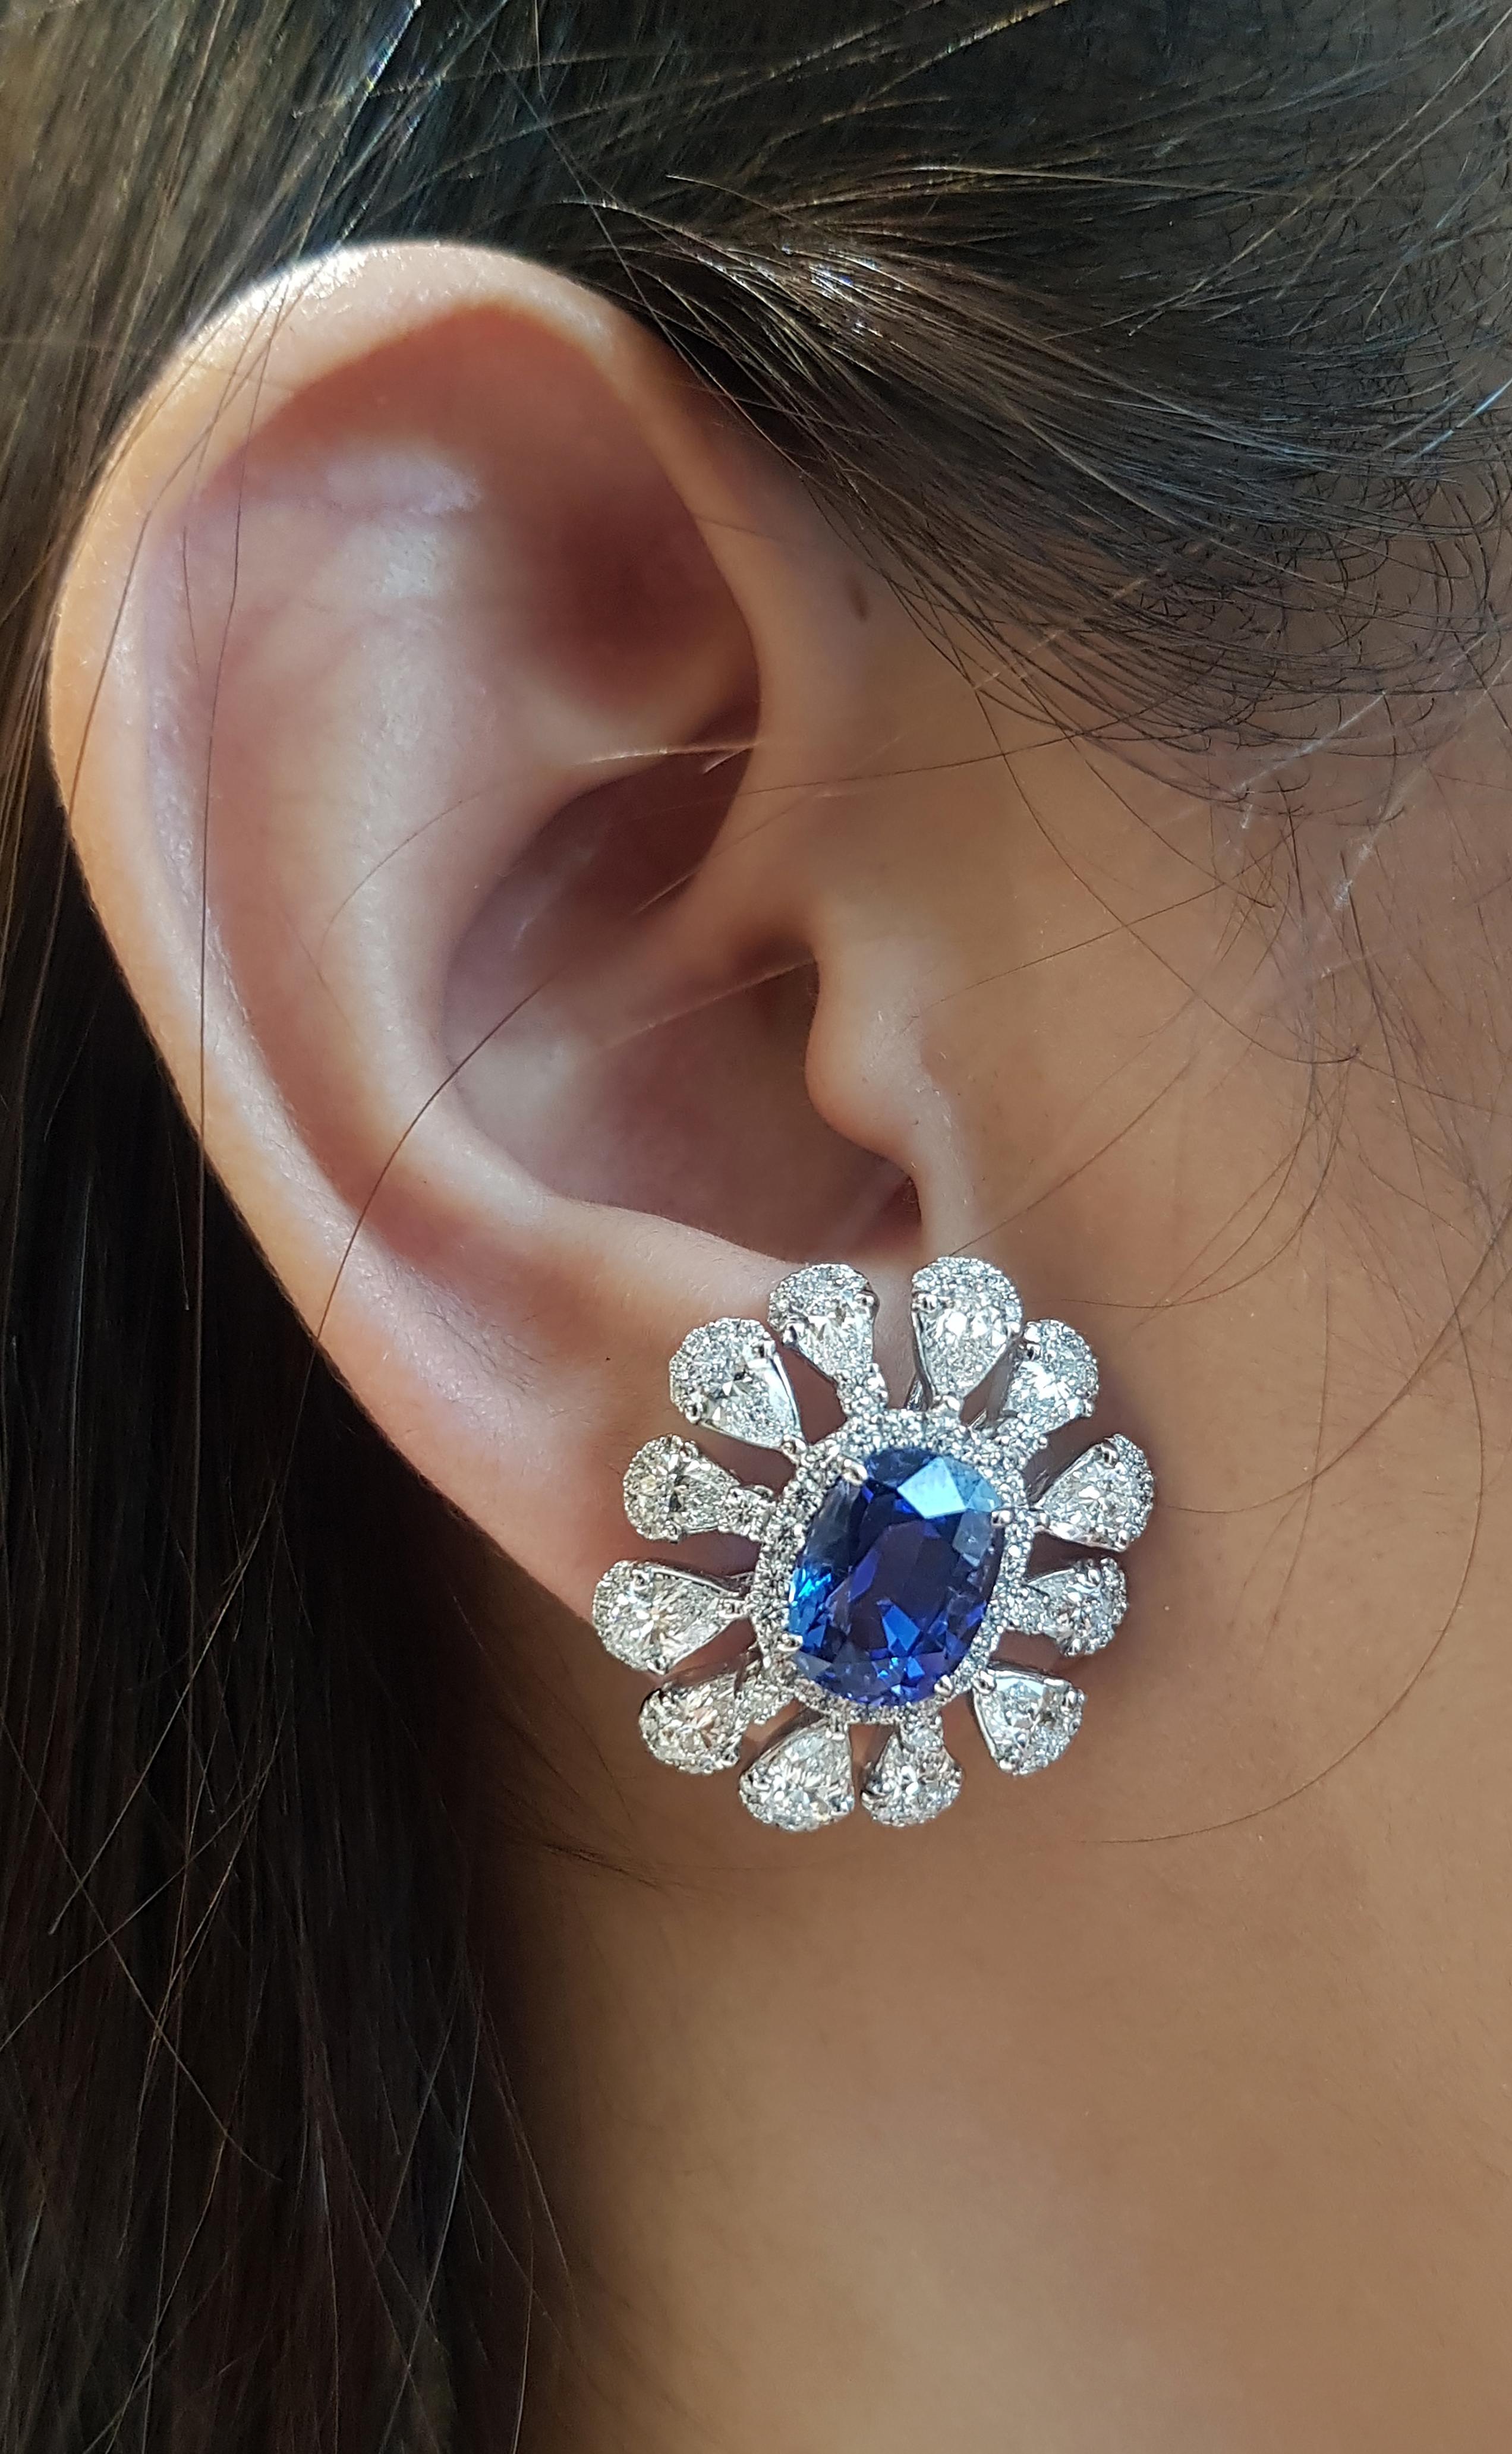 Blue Sapphire 9.50 carats with Diamond 5.35 carats Earrings set in Platinum 950 Settings

Width:  2.2 cm 
Length: 2.5 cm
Total Weight: 23.34 grams

